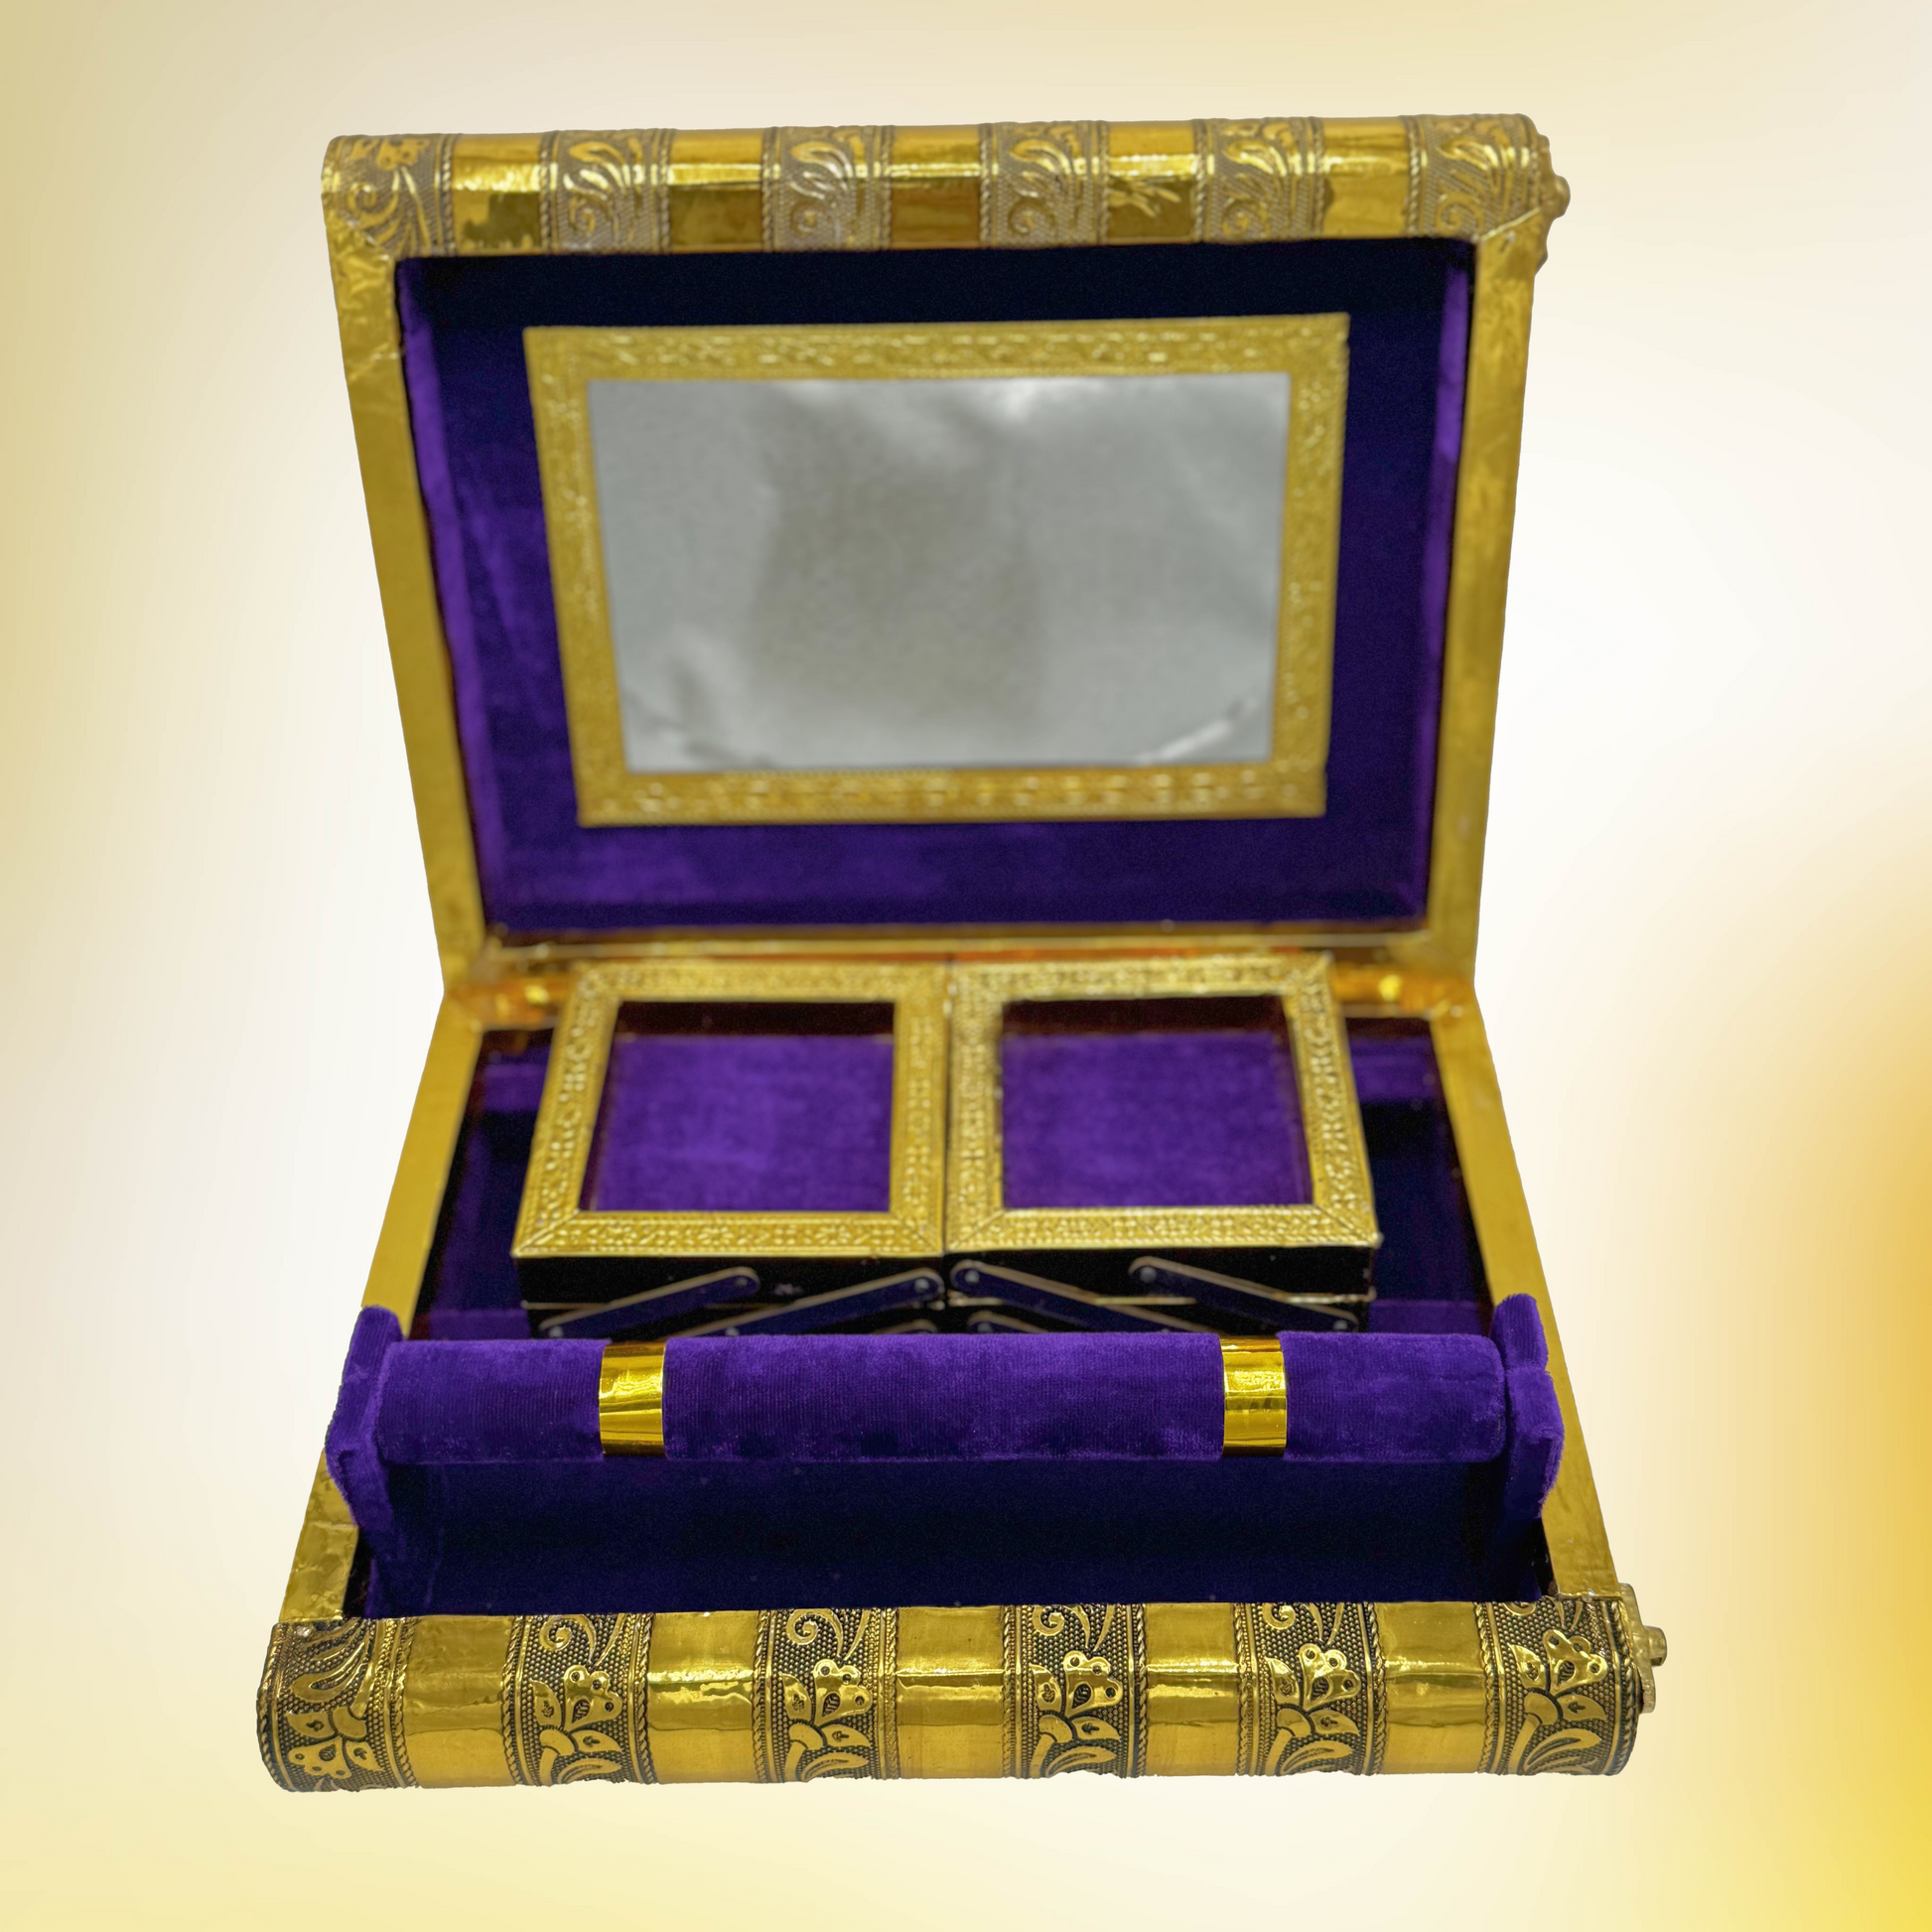 vintage Indian jewelry box with purple violet lining that shows the lid open and the trays folded. The bangle box holder is in the front. the color of the velvet lining is purple or violet